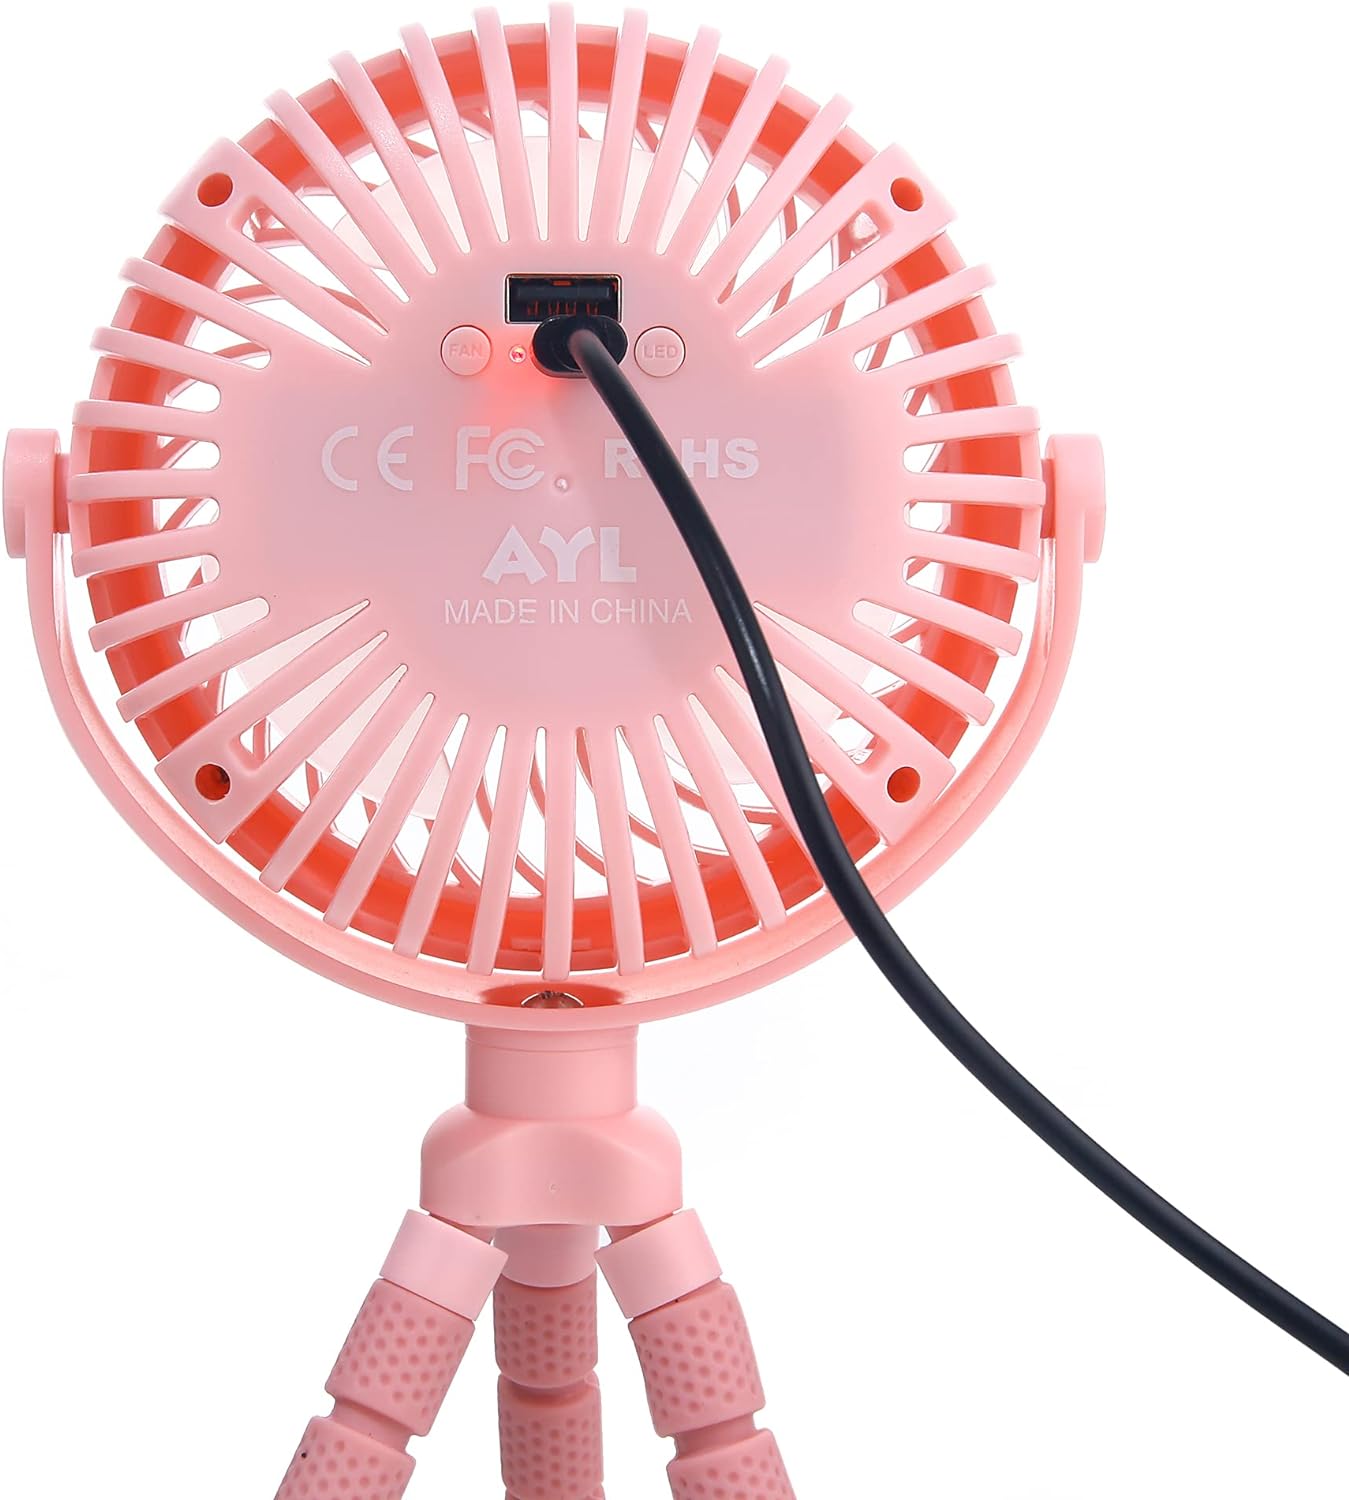 AYL Portable Fan Rechargeable Battery Operated, Small Stroller Fan with Lights, Clip On Fan, Handheld Cooling Mini Fan for Travel, Car Seat, Camping, Bedroom (Black)